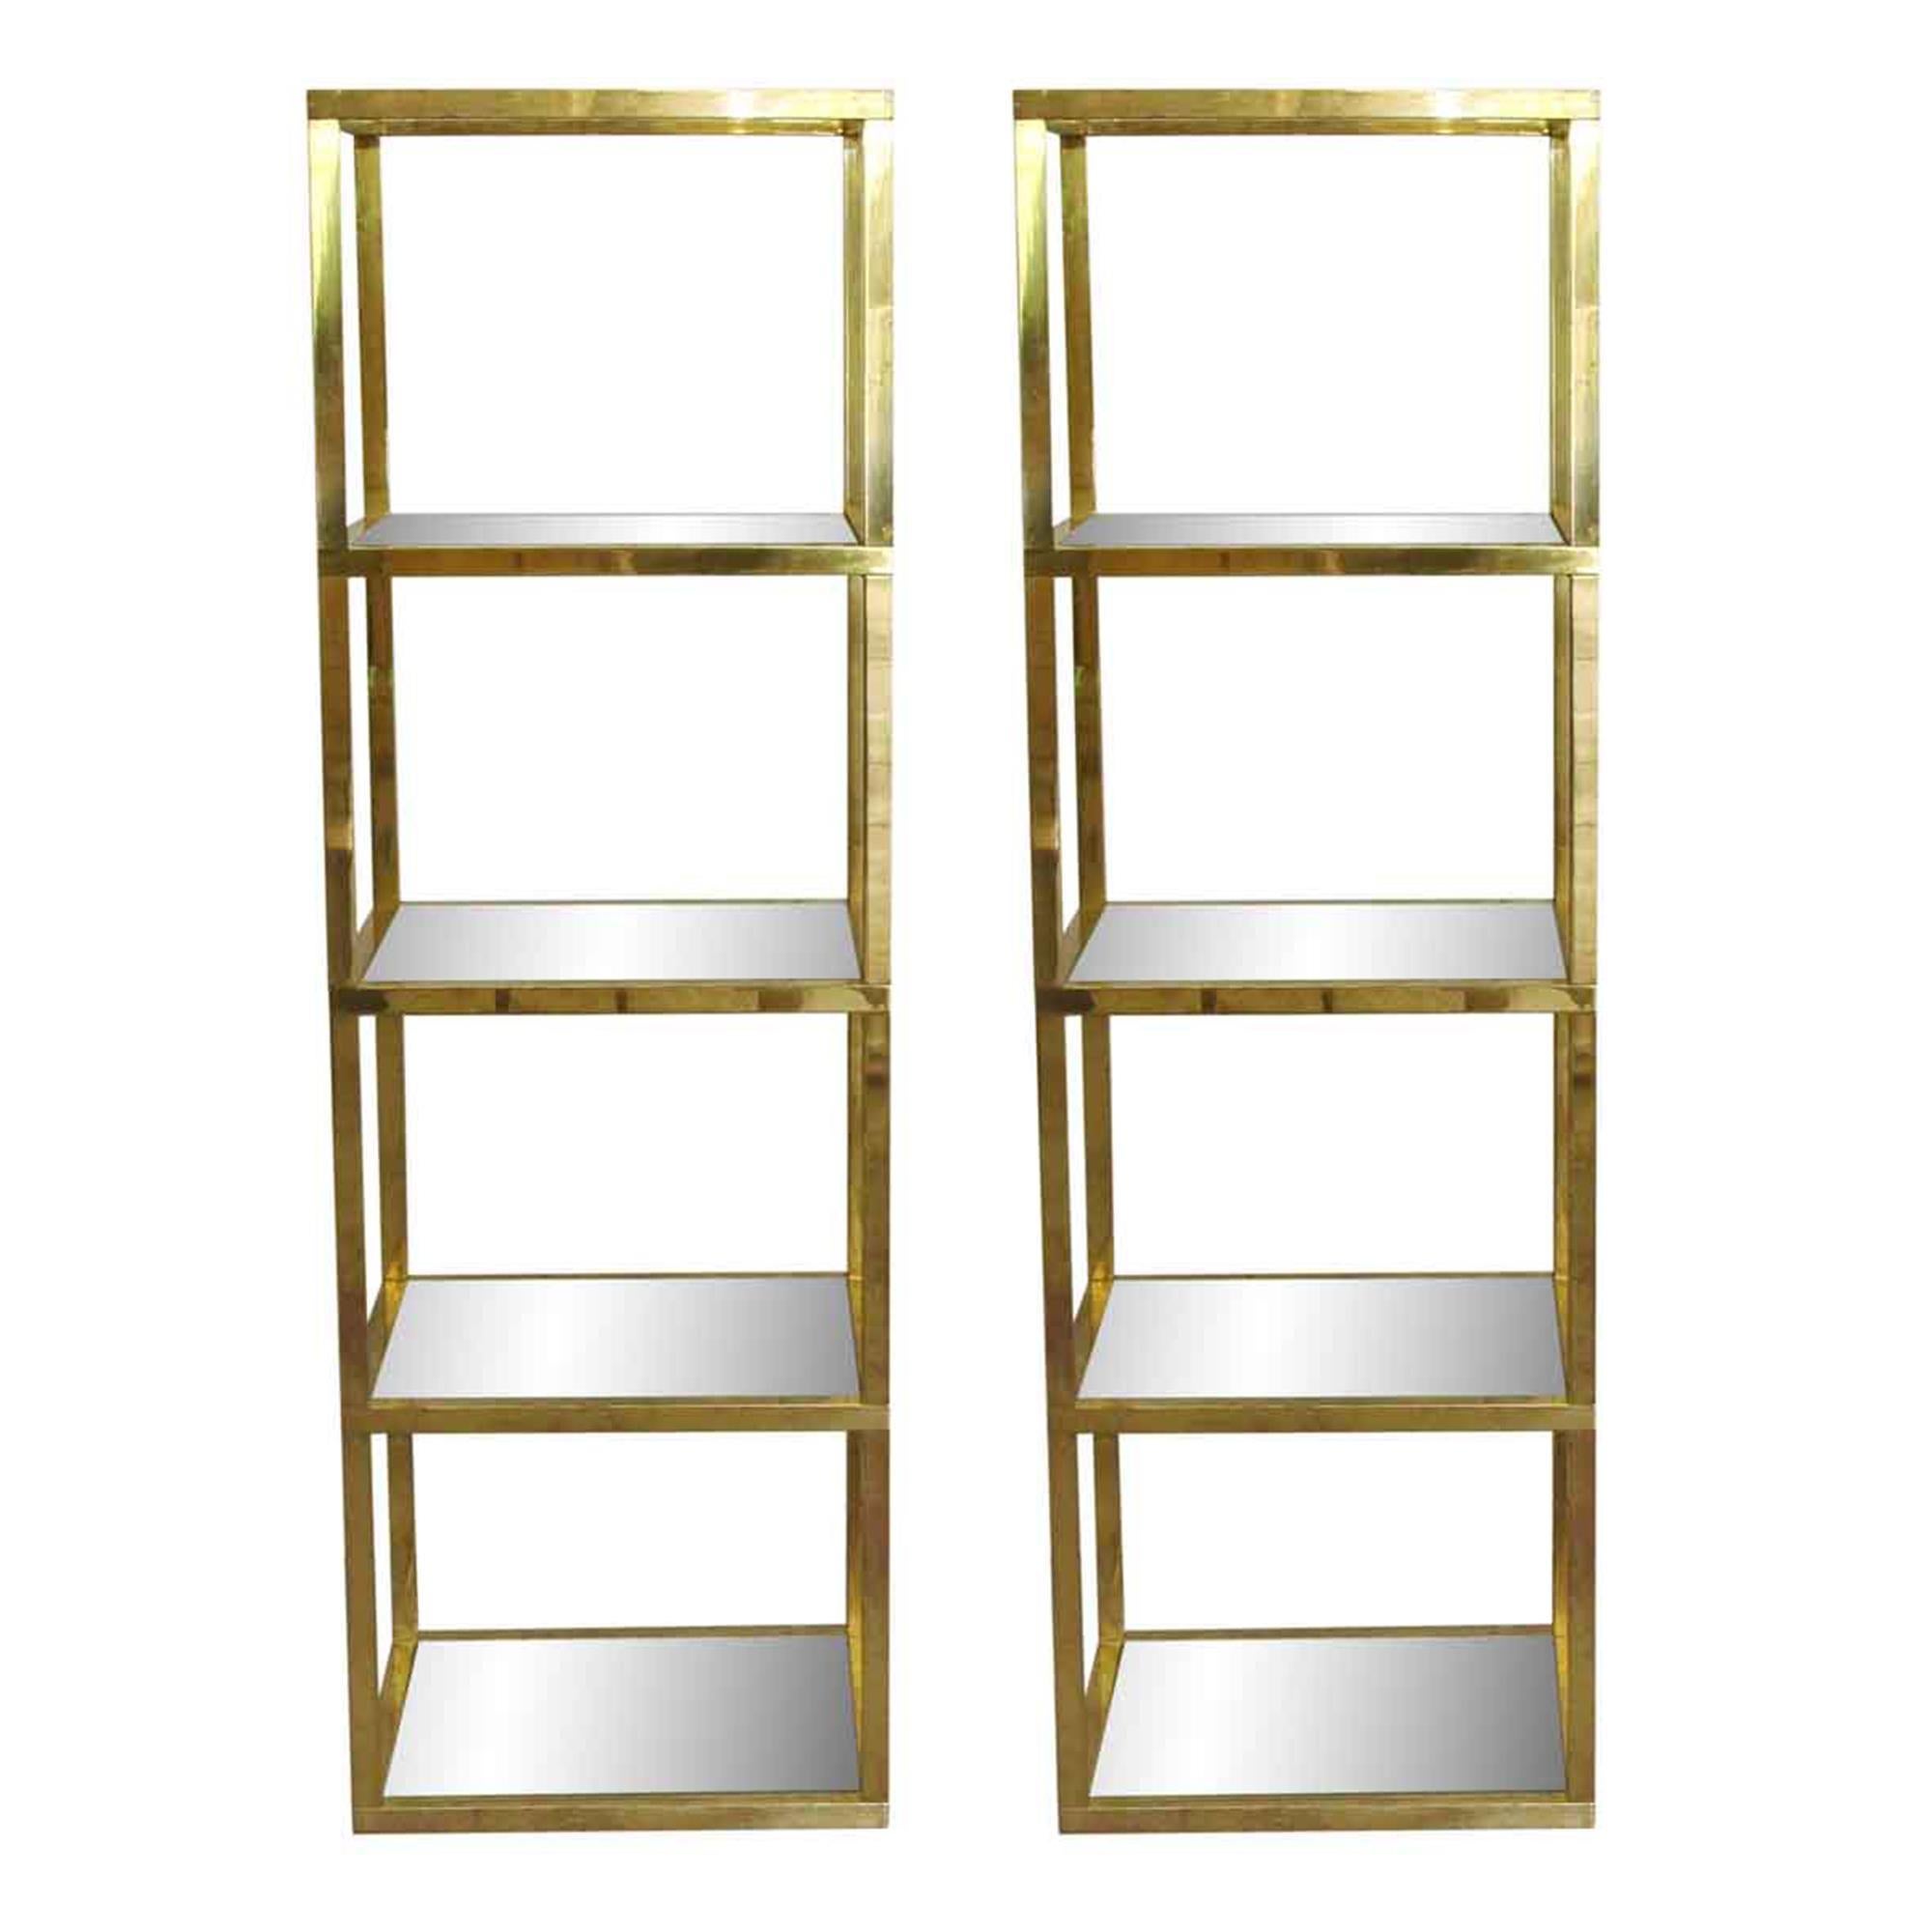 1970s Pair of Tall Polished Brass and Glass Étagère from Paris, France